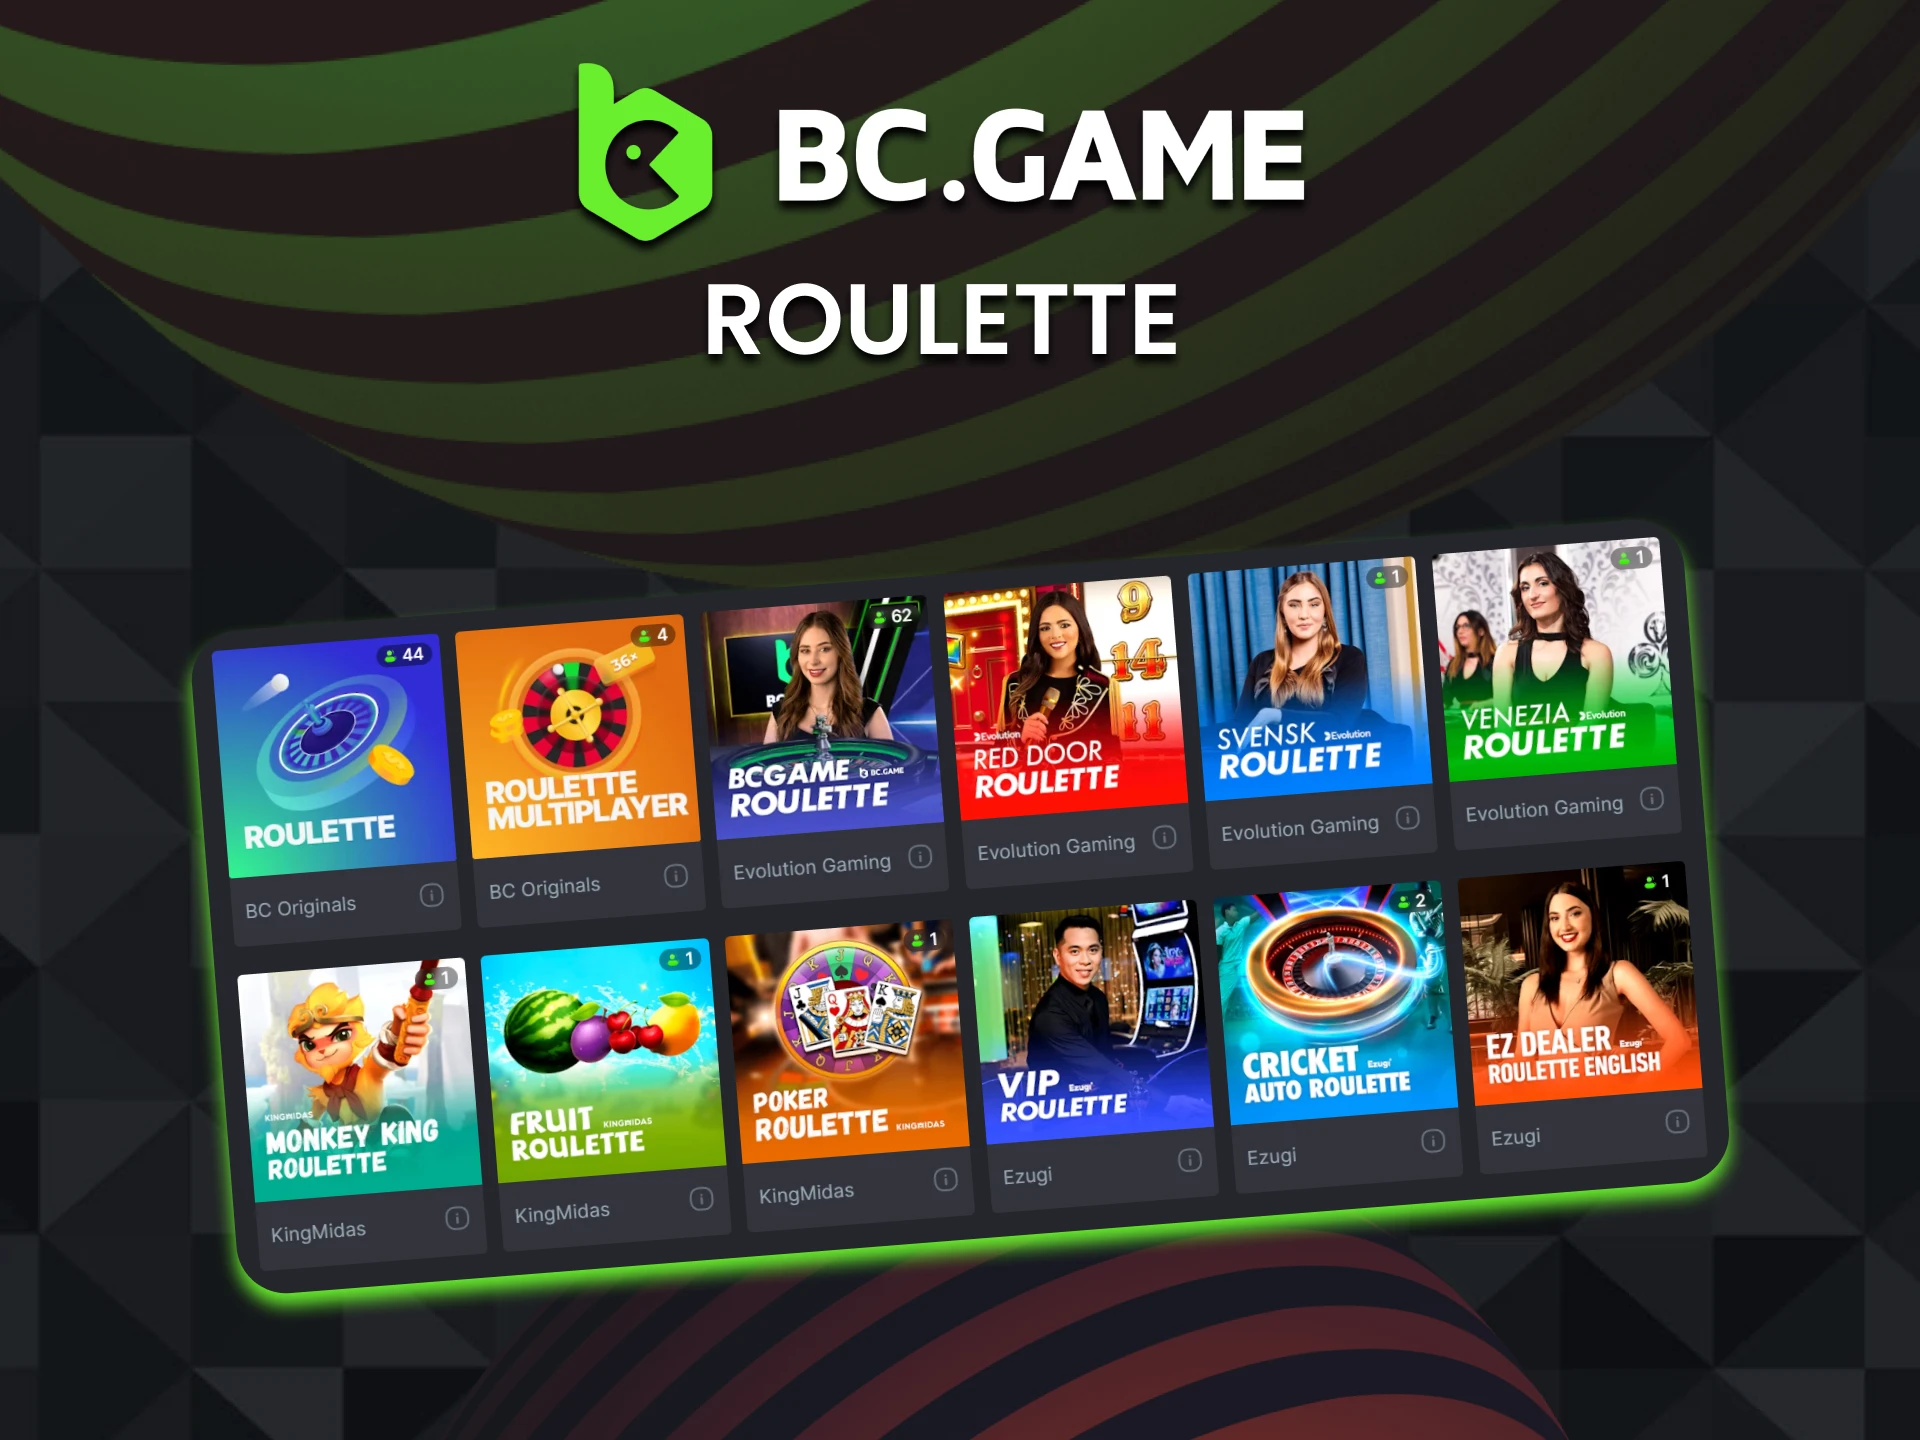 Play roulette with BC Game BD.